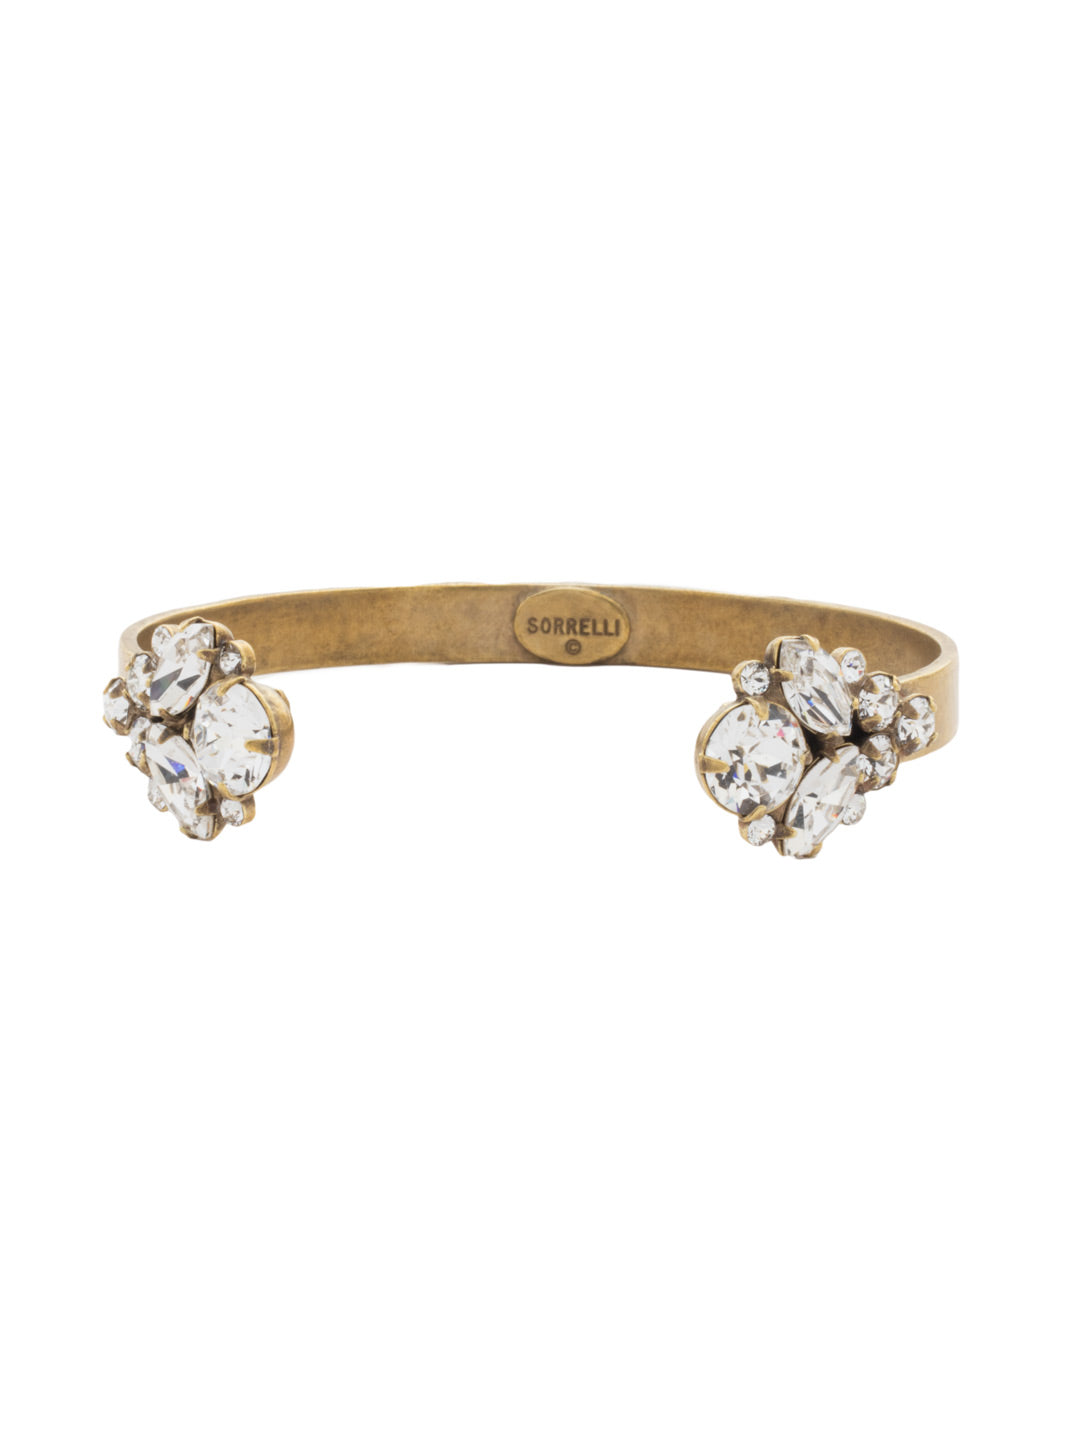 Crystal Cluster Cuff Bracelet - BCW17AGCRY - <p>Two crystal clusters adorn this open cuff bracelet to add well needed sparkle to any arm party! From Sorrelli's Crystal collection in our Antique Gold-tone finish.</p>